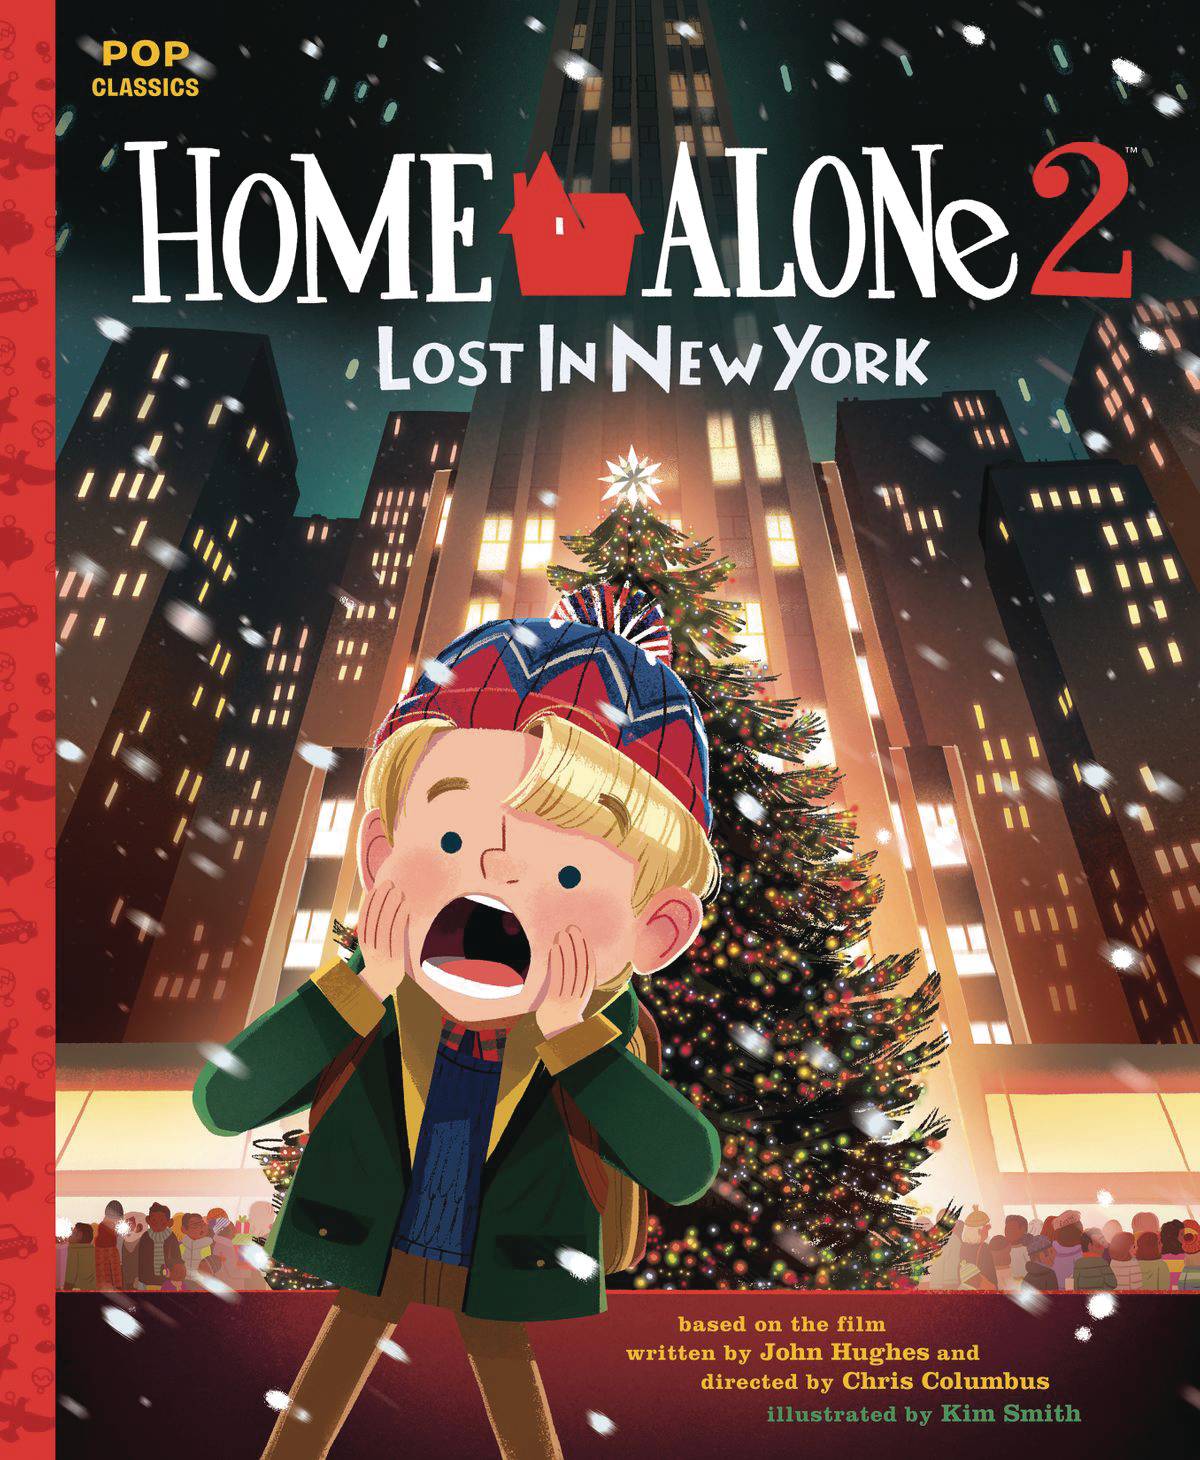 Home Alone 2 Lost In New York Pop Classic Illustrated Storybook